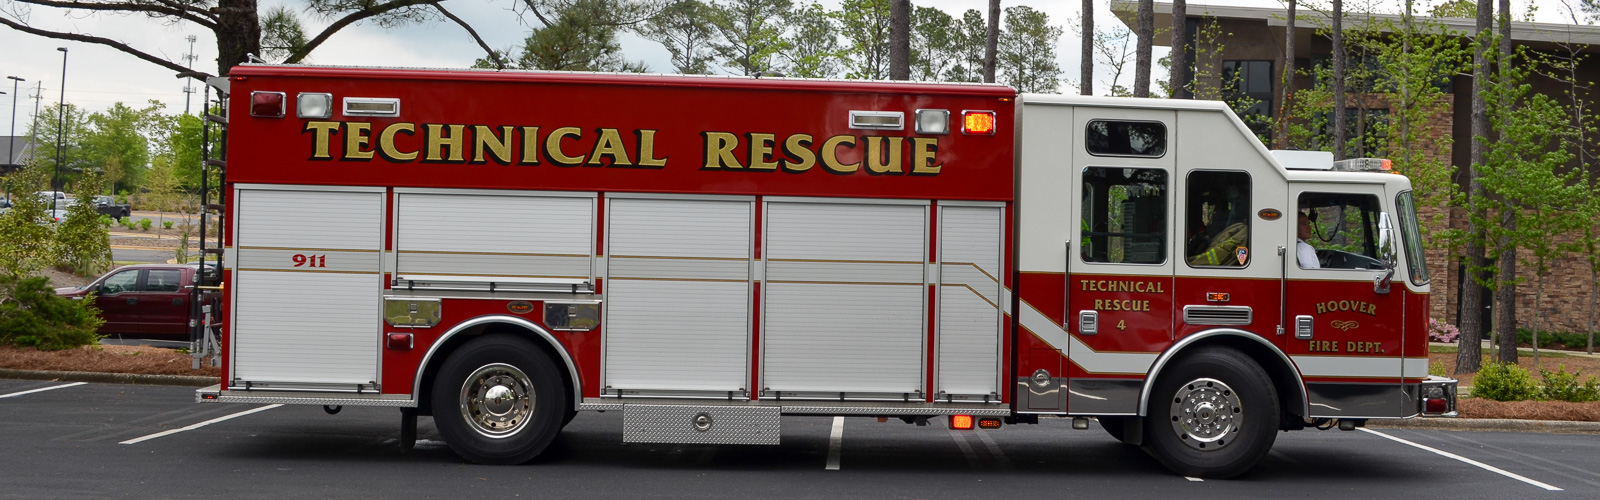 Hoover Fire Department Technical Rescue